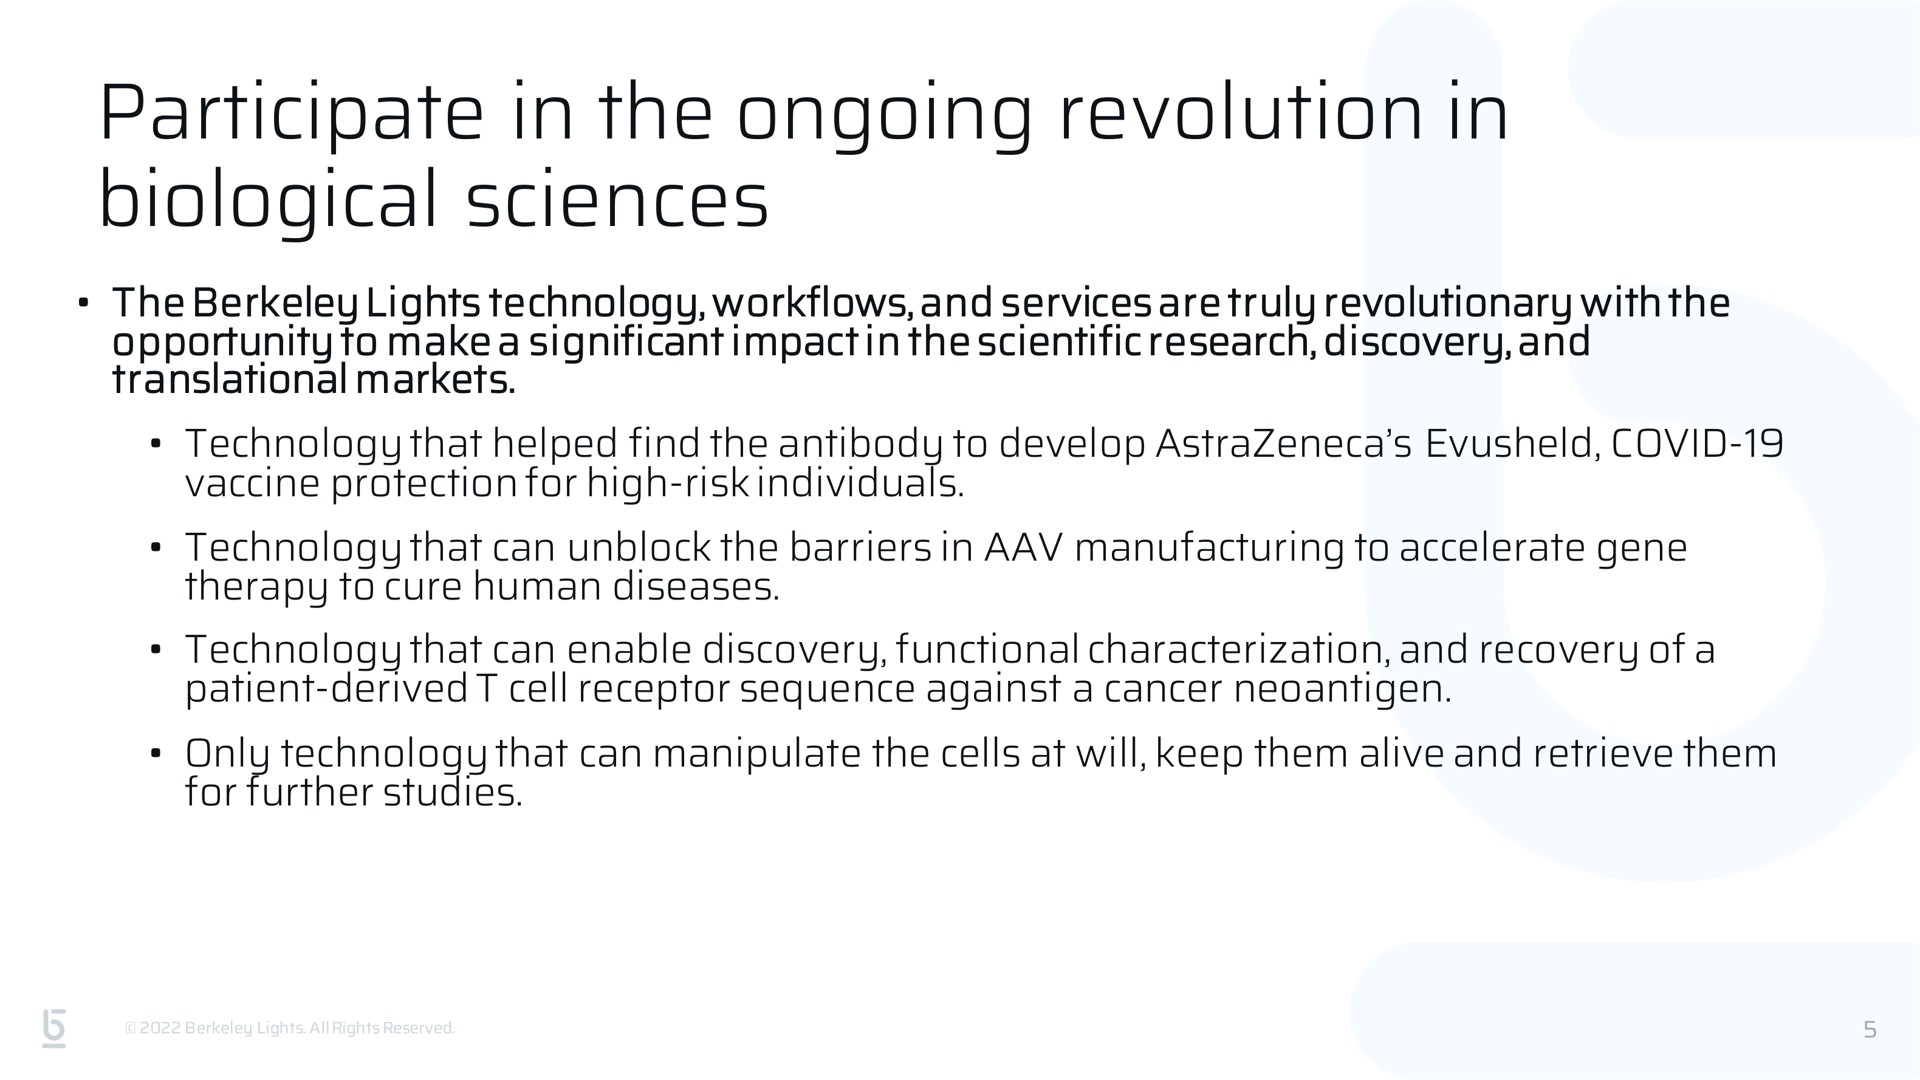 participate in the ongoing revolution in biological sciences | Berkeley Lights